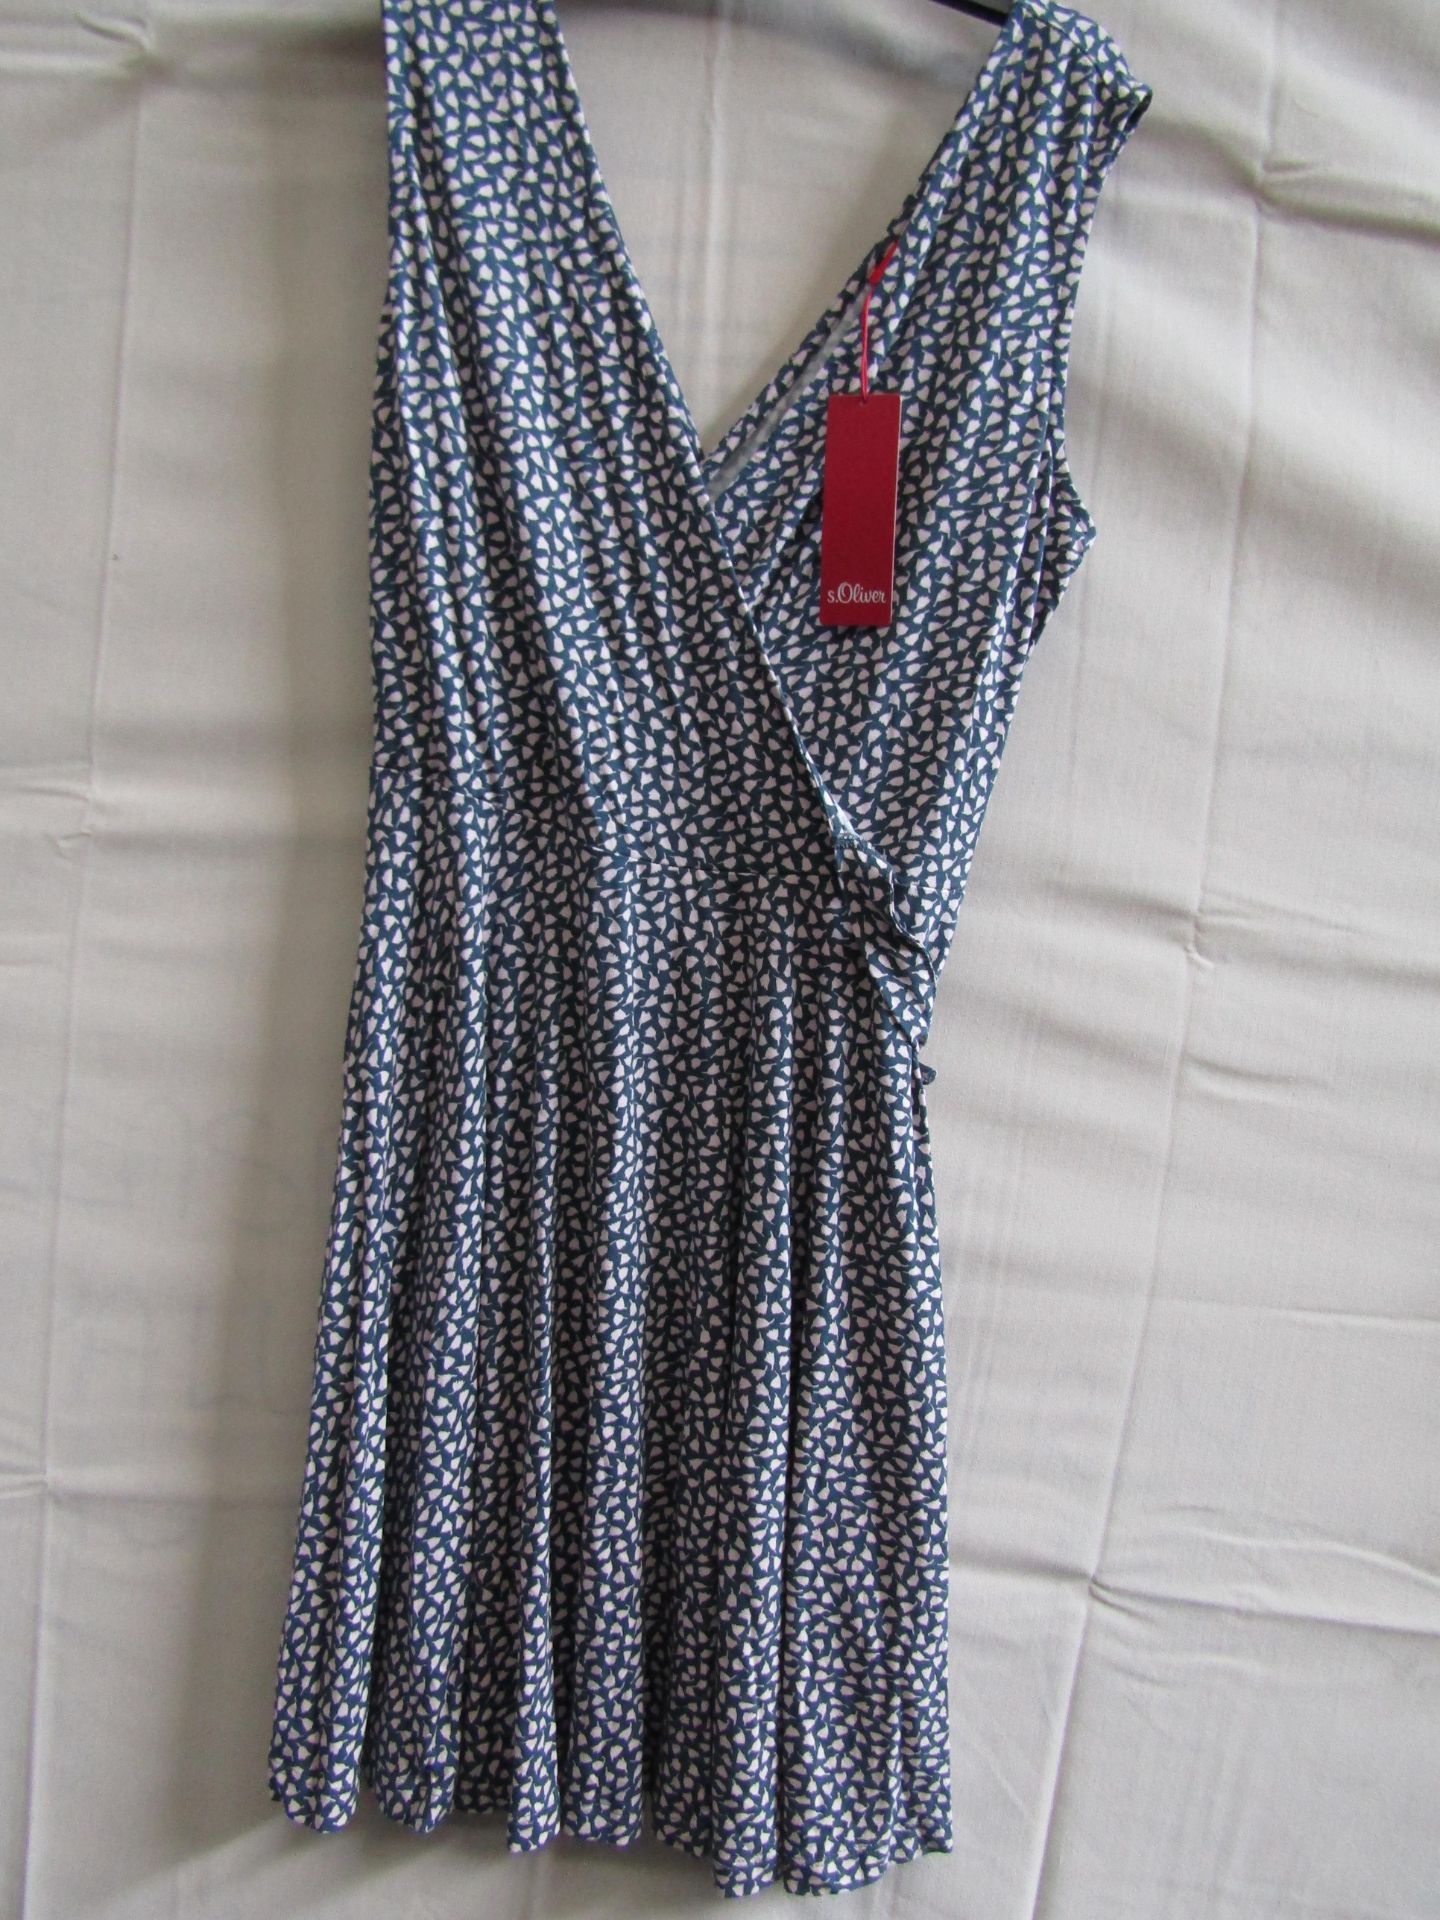 S. Oliver Dress Grey/Pink Size 12 Looks Unworn Tags Attatched